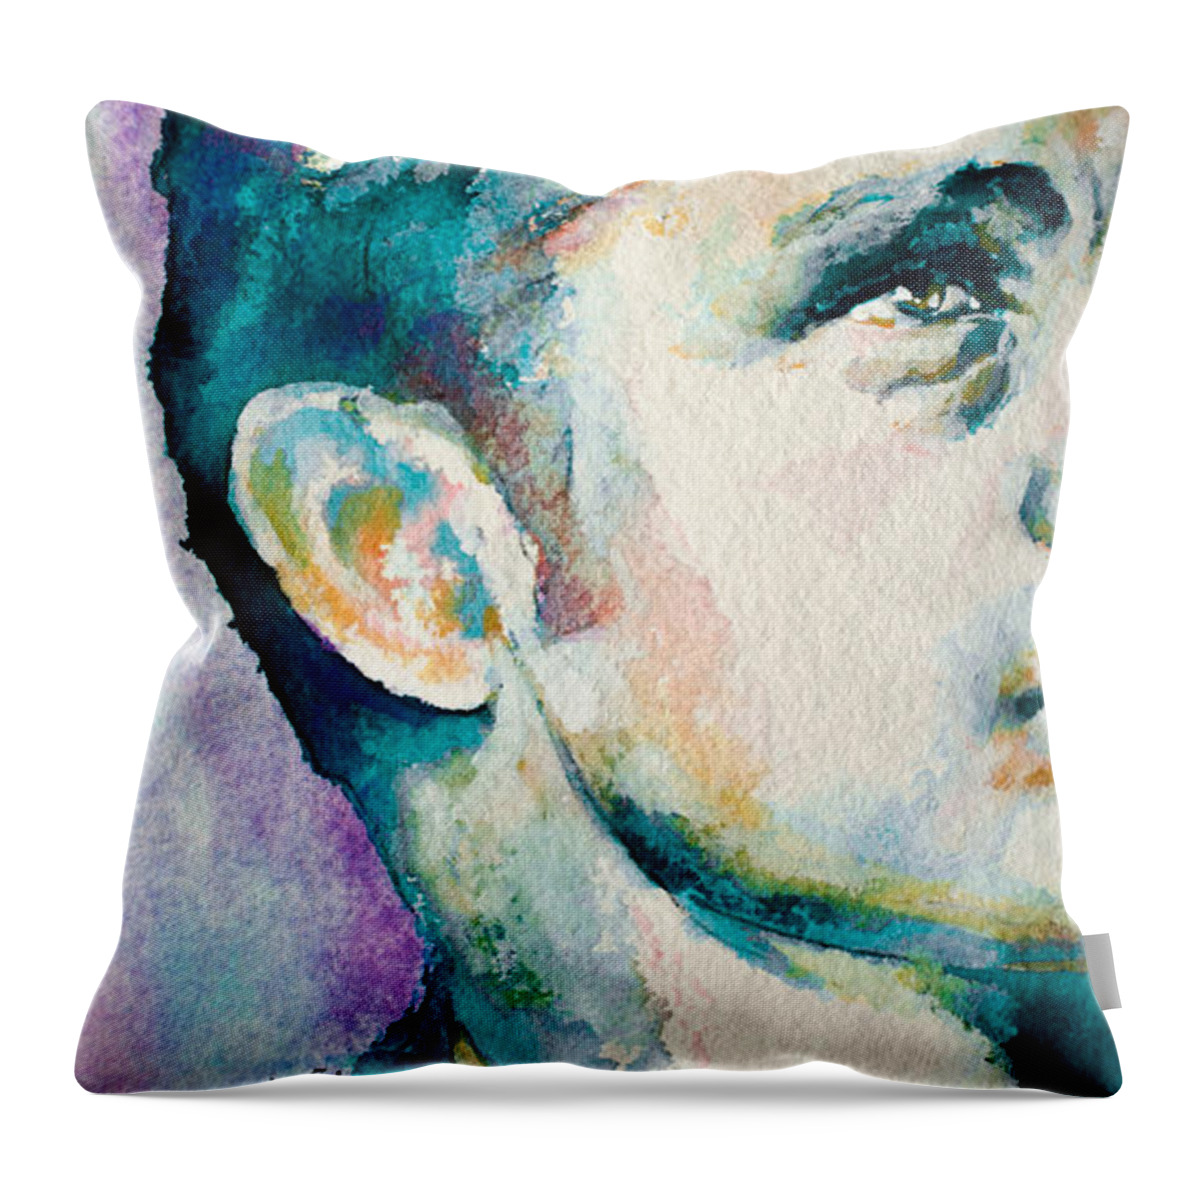 James Dean Throw Pillow featuring the painting Rebel Without a Cause 2 by Laur Iduc